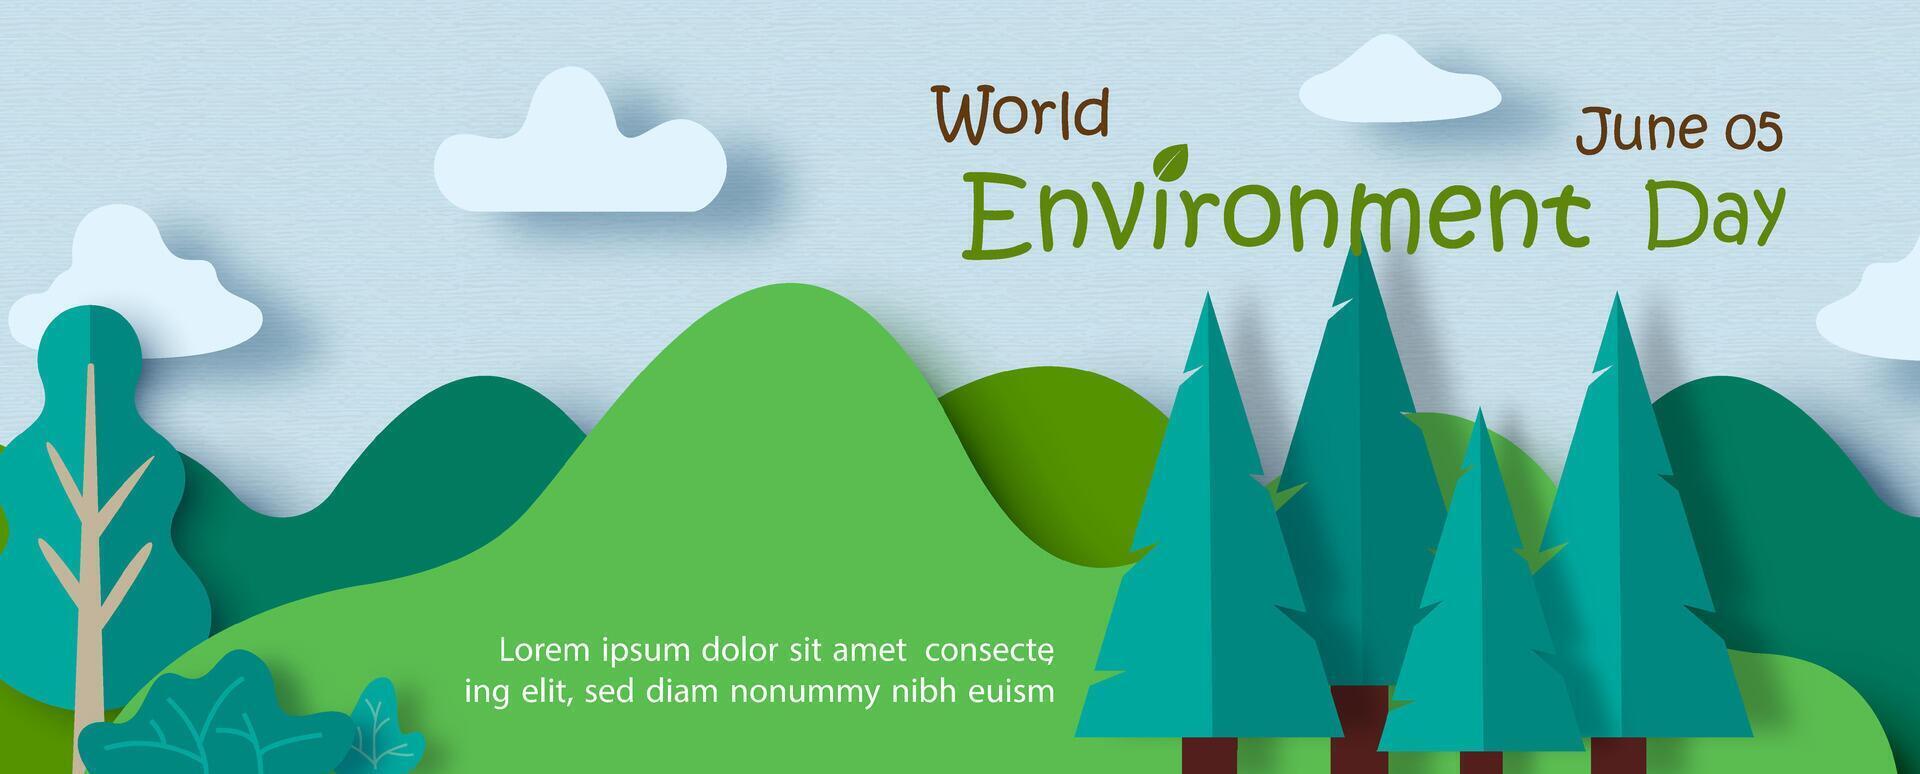 Origami and paper cut wild concept with wording of world environment day on blue background. Poster campaign of world environment day in paper cut style and vector design.